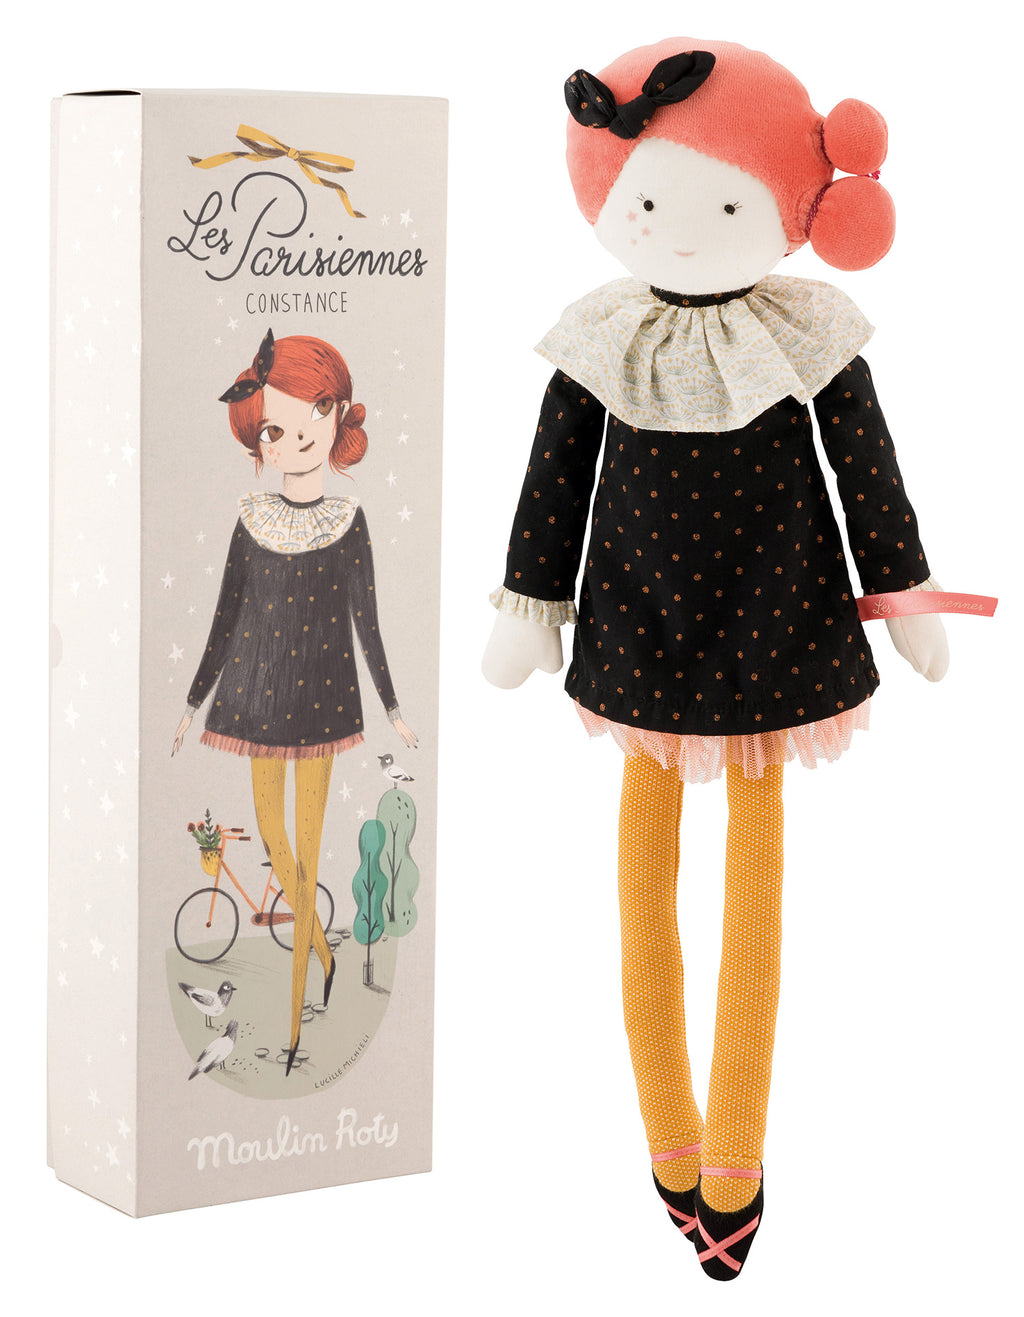 Madame Constance is oh-so-elegant, dressed in a floaty black cotton sequined dress, complete with ruffs and tulle frills, with bar shoes and beautiful braids in her hair. She is presented in a gift box, decorated with a Paris theme. She measures 47cm.